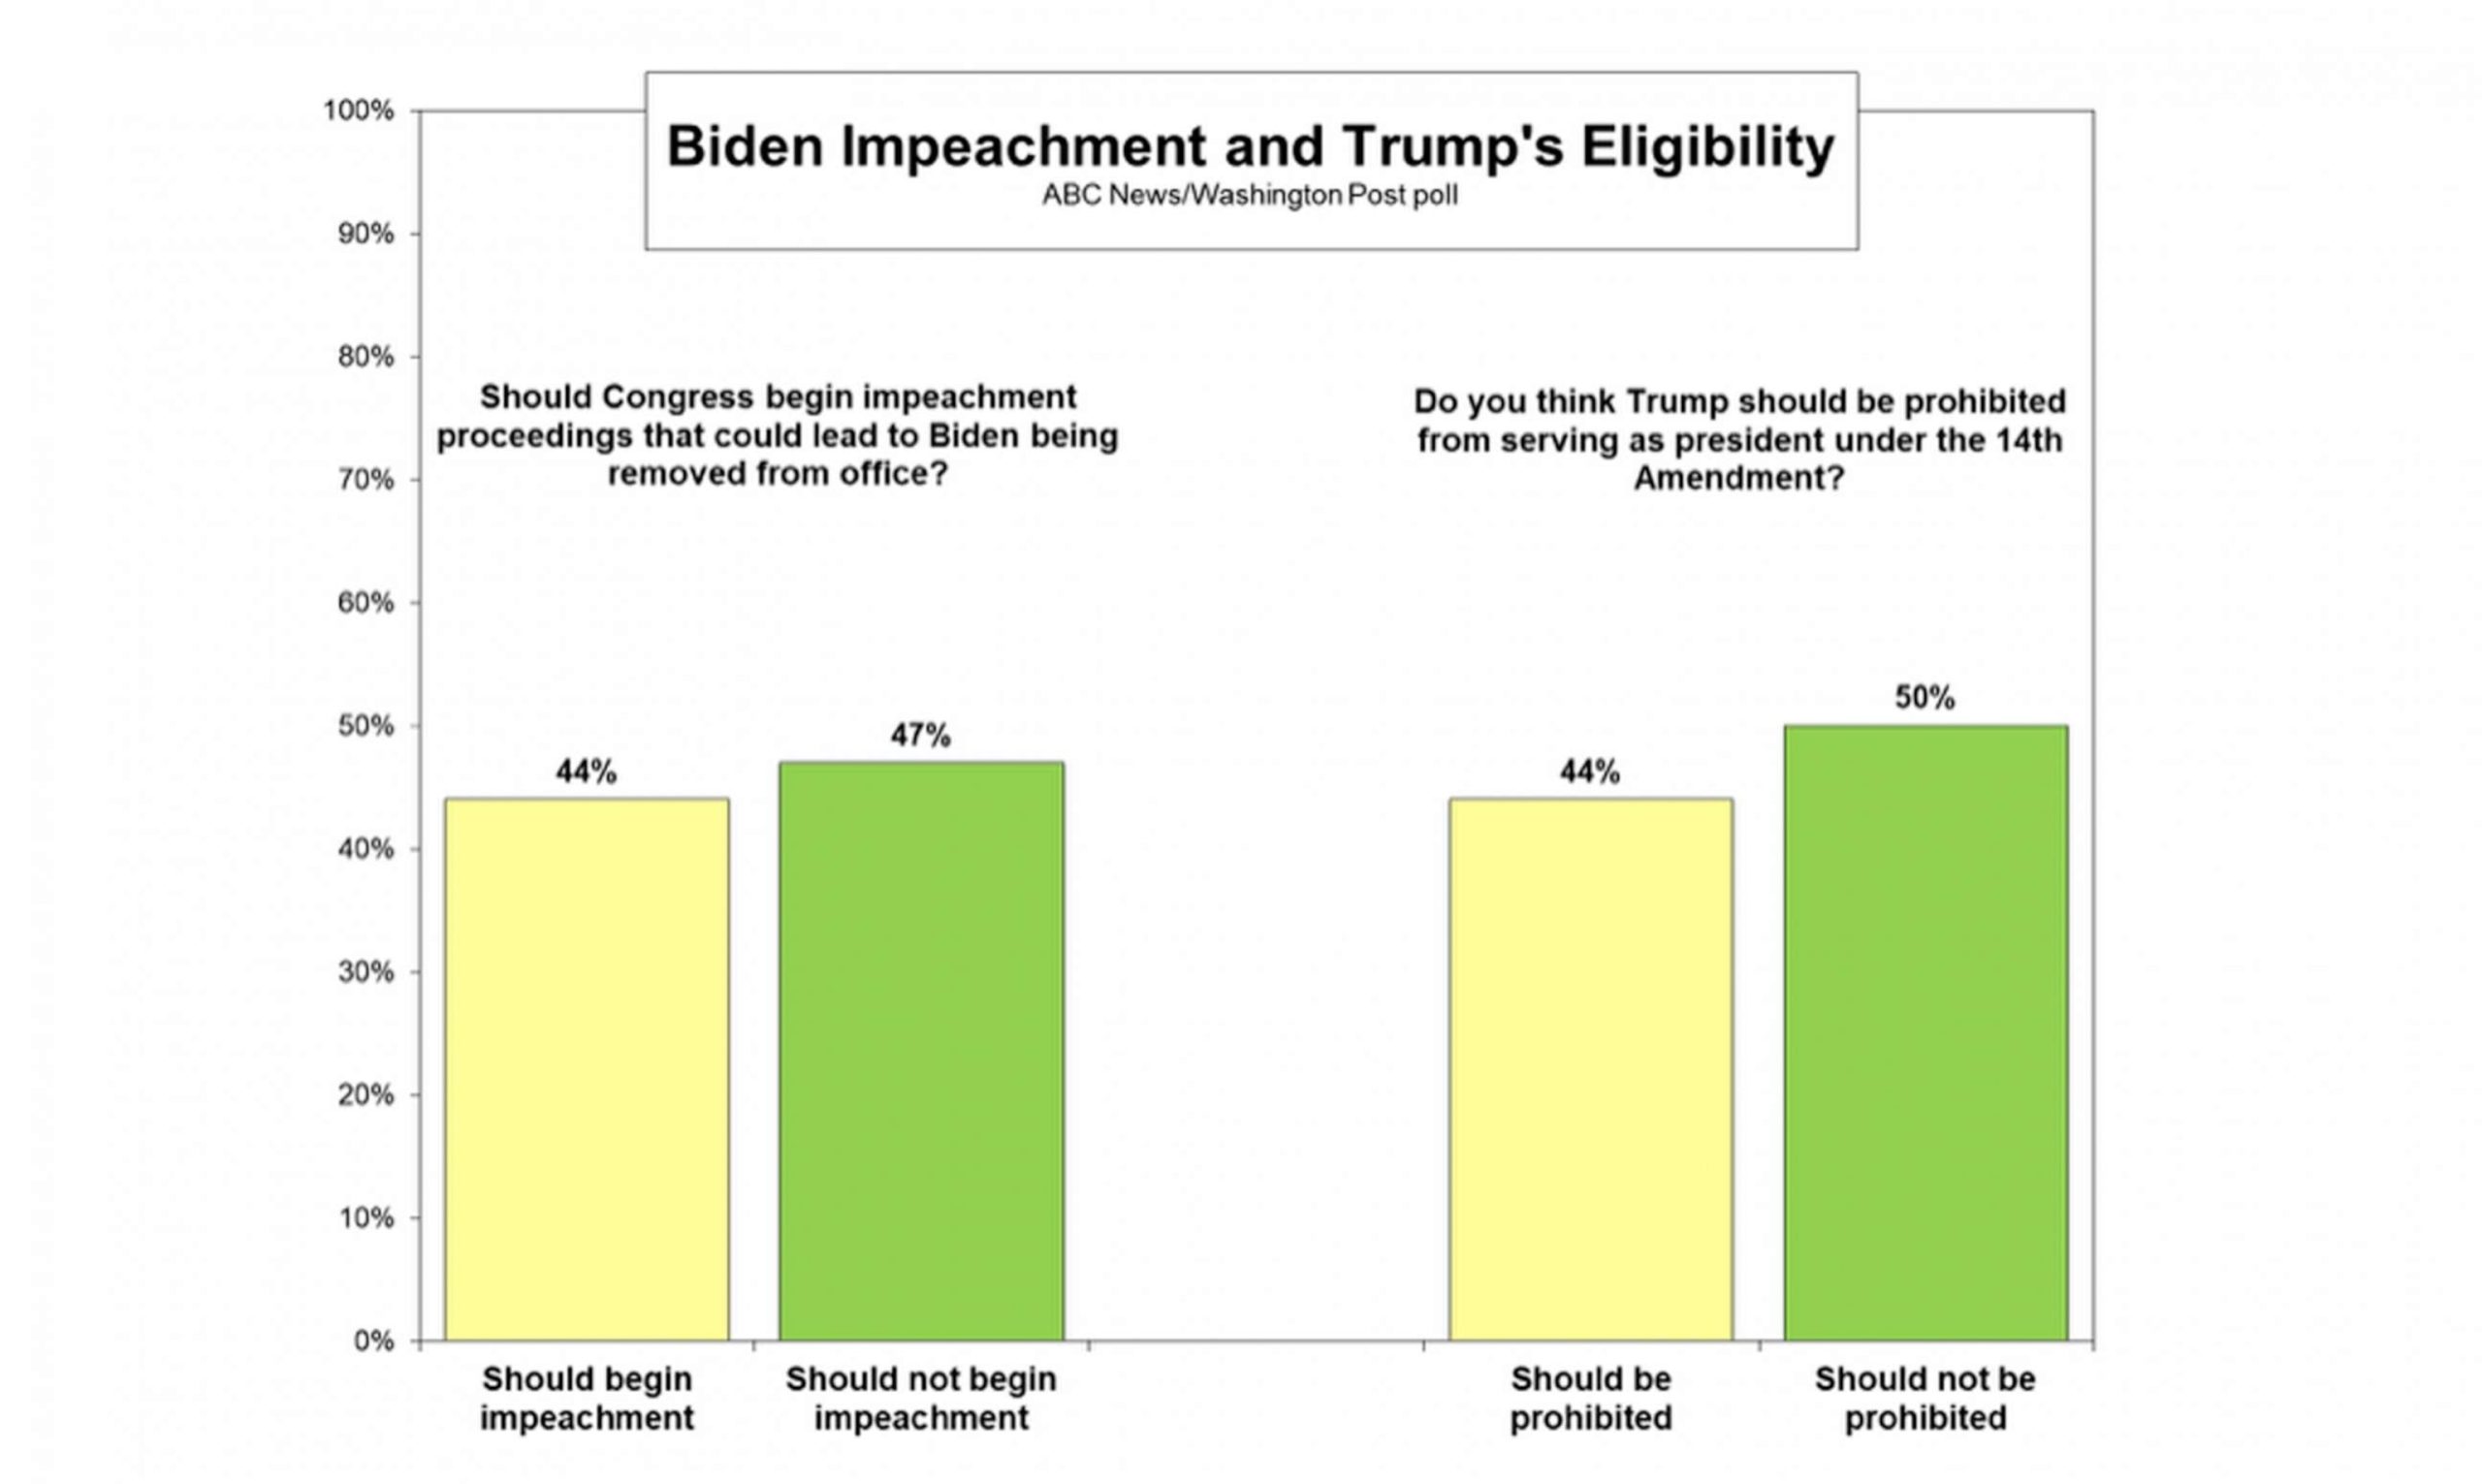 Divergent Perspectives on Biden Impeachment and Trump's Eligibility Highlight Deep Partisan Divisions